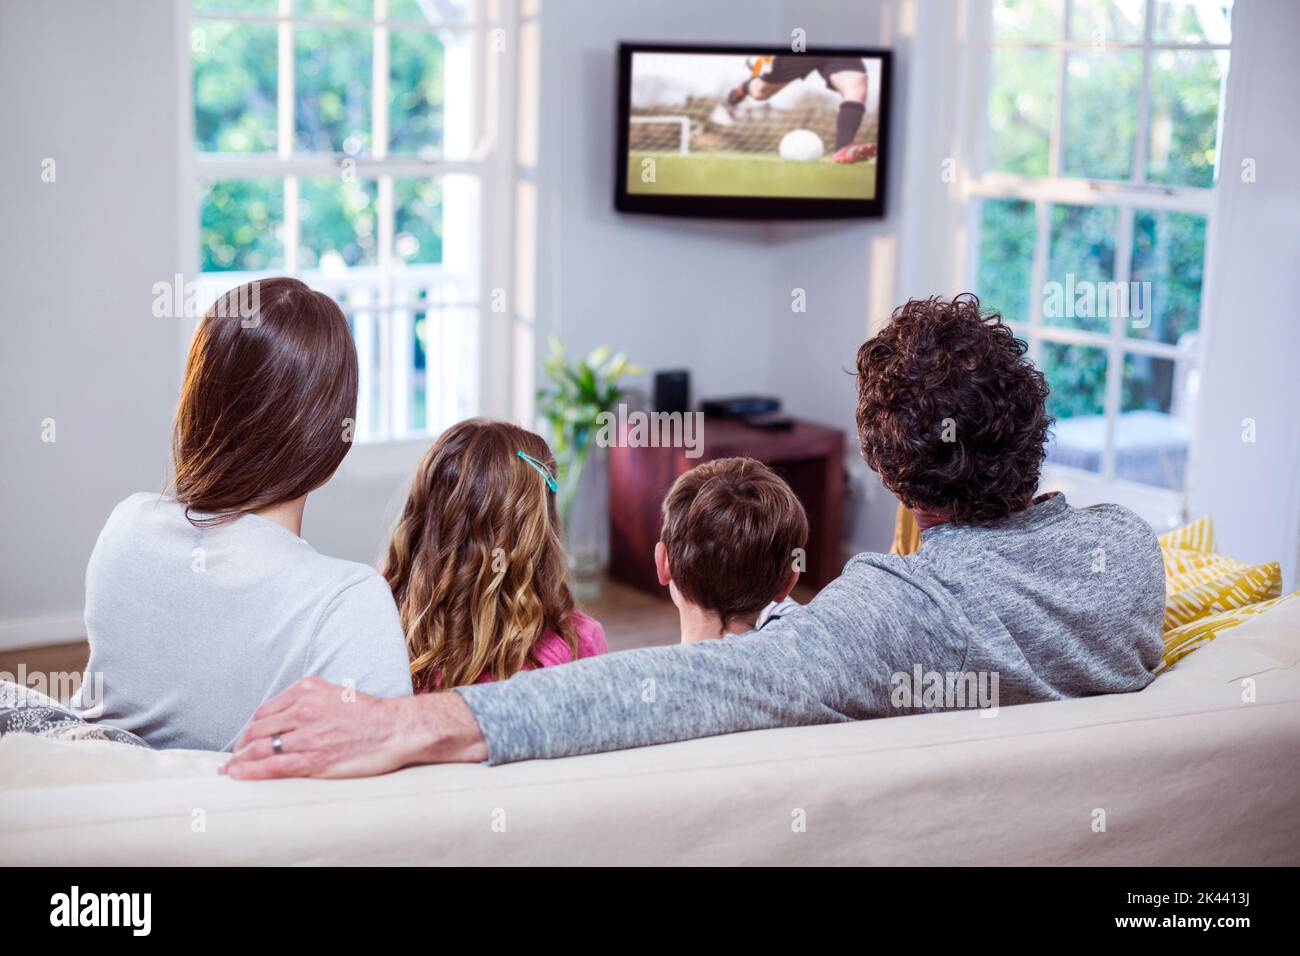 Family watching television while sitting on sofa at home Stock Photo